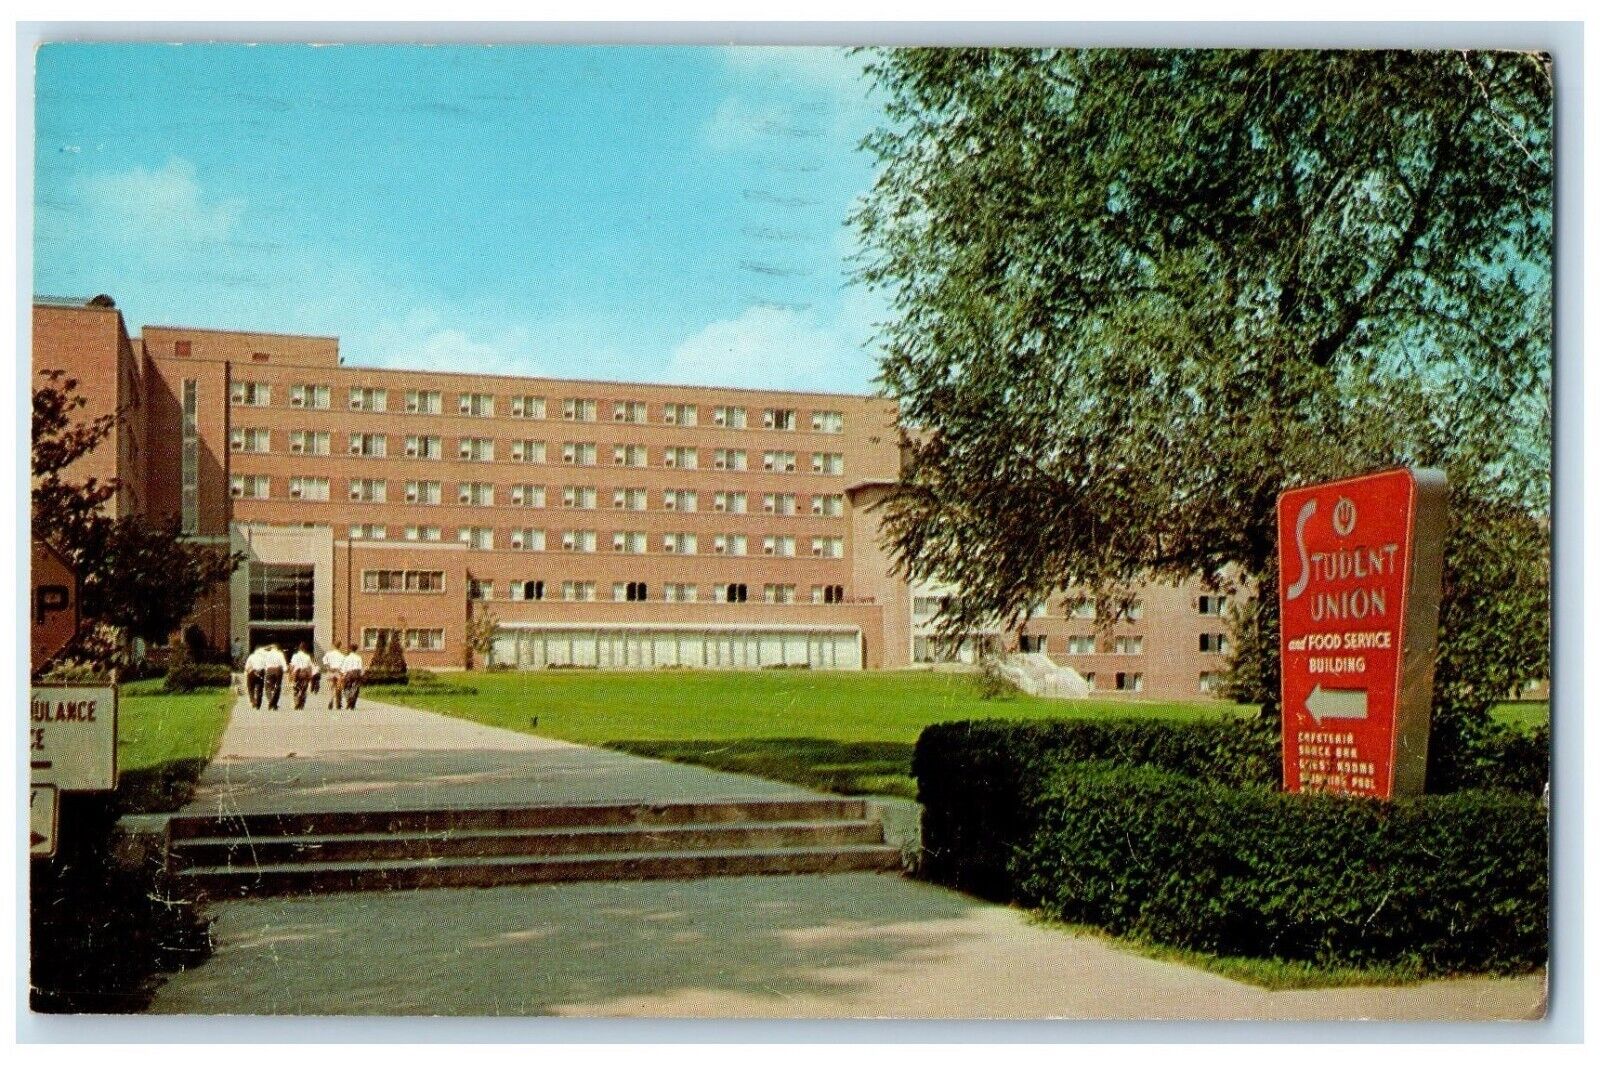 1965 Student Union & Food Service Indiana University Medical Center IN Postcard